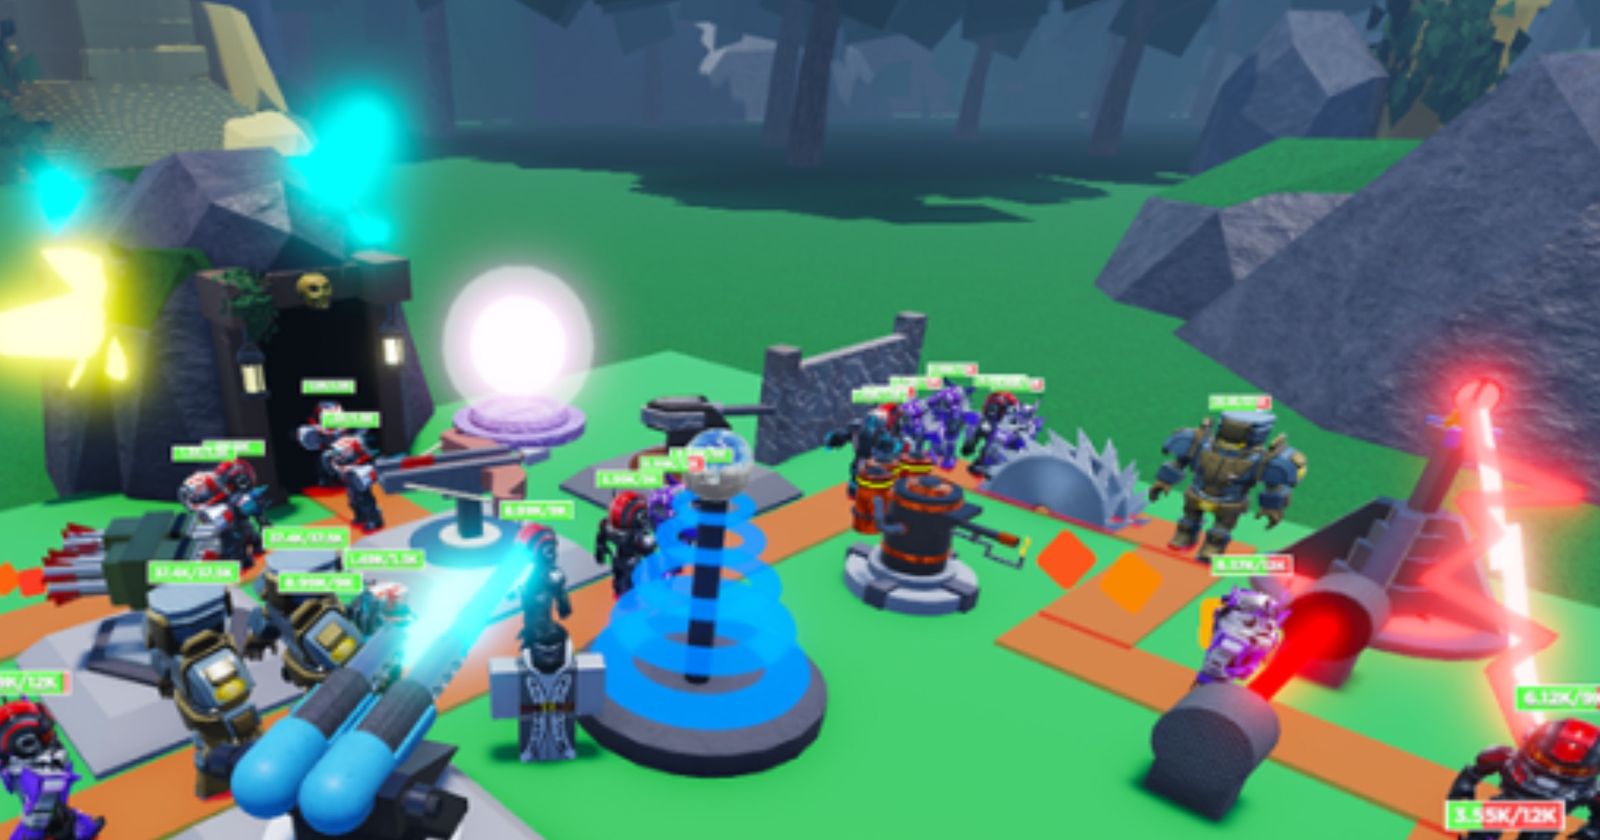 Roblox Defender's Depot codes (February 2023): Free tokens, crates, and more